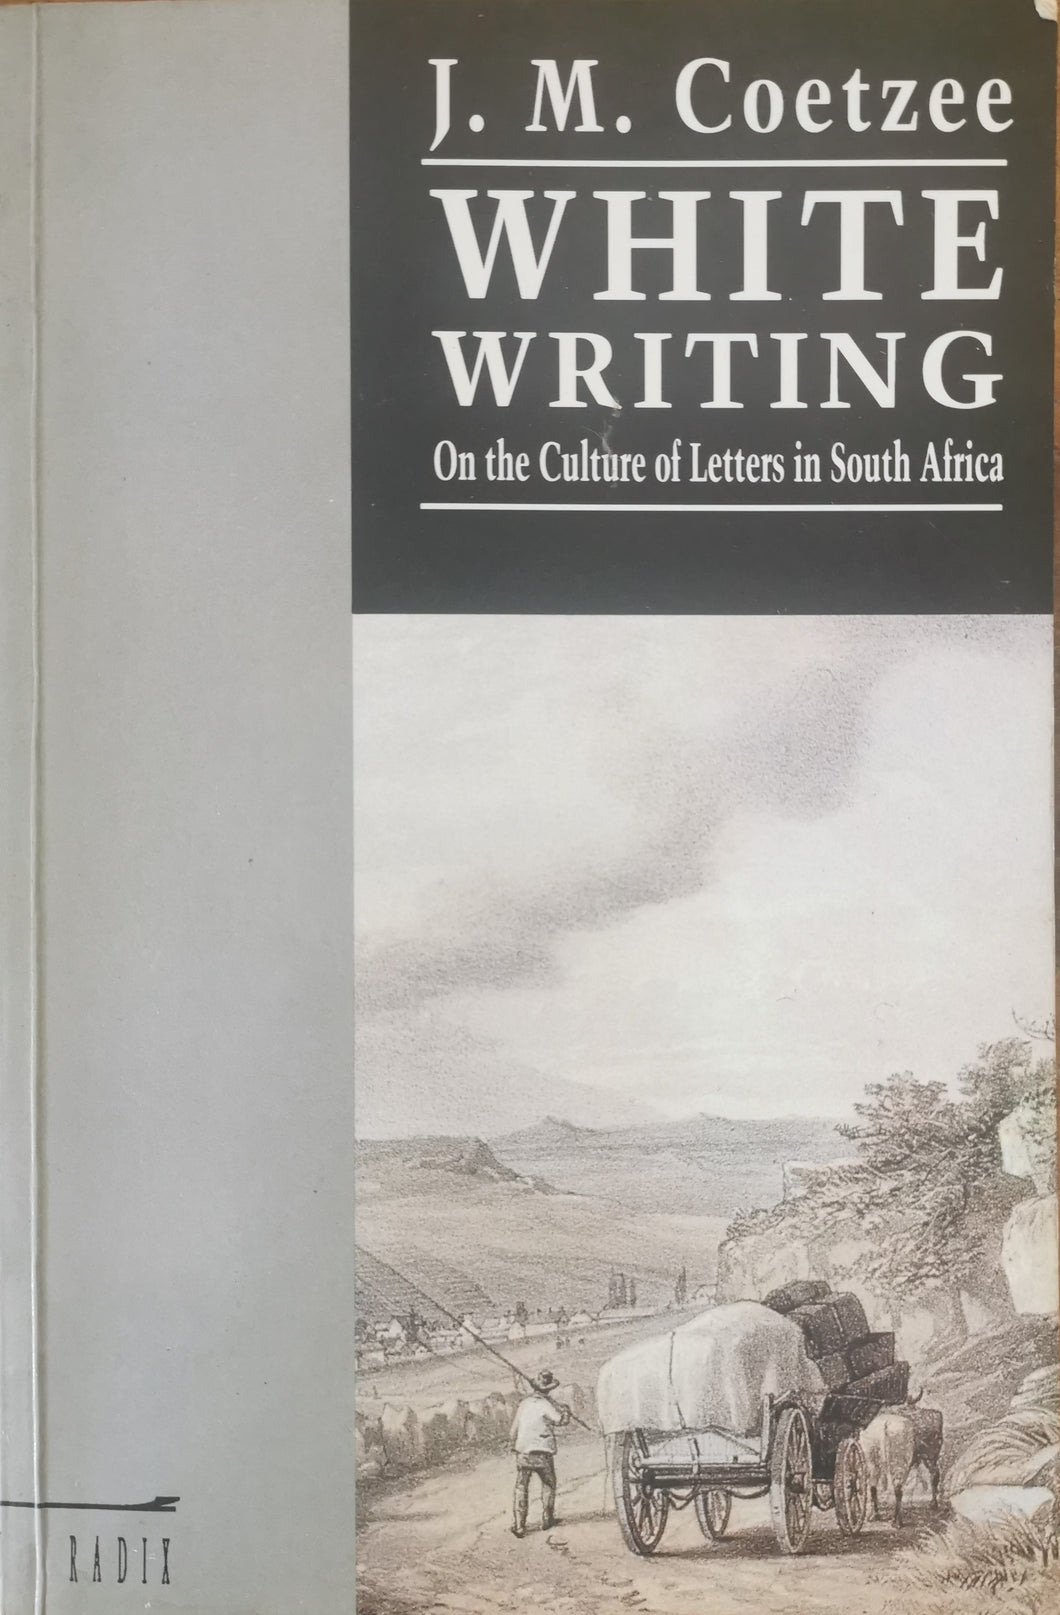 JM Coetzee - White Writing: On the Culture of Letters in South Africa